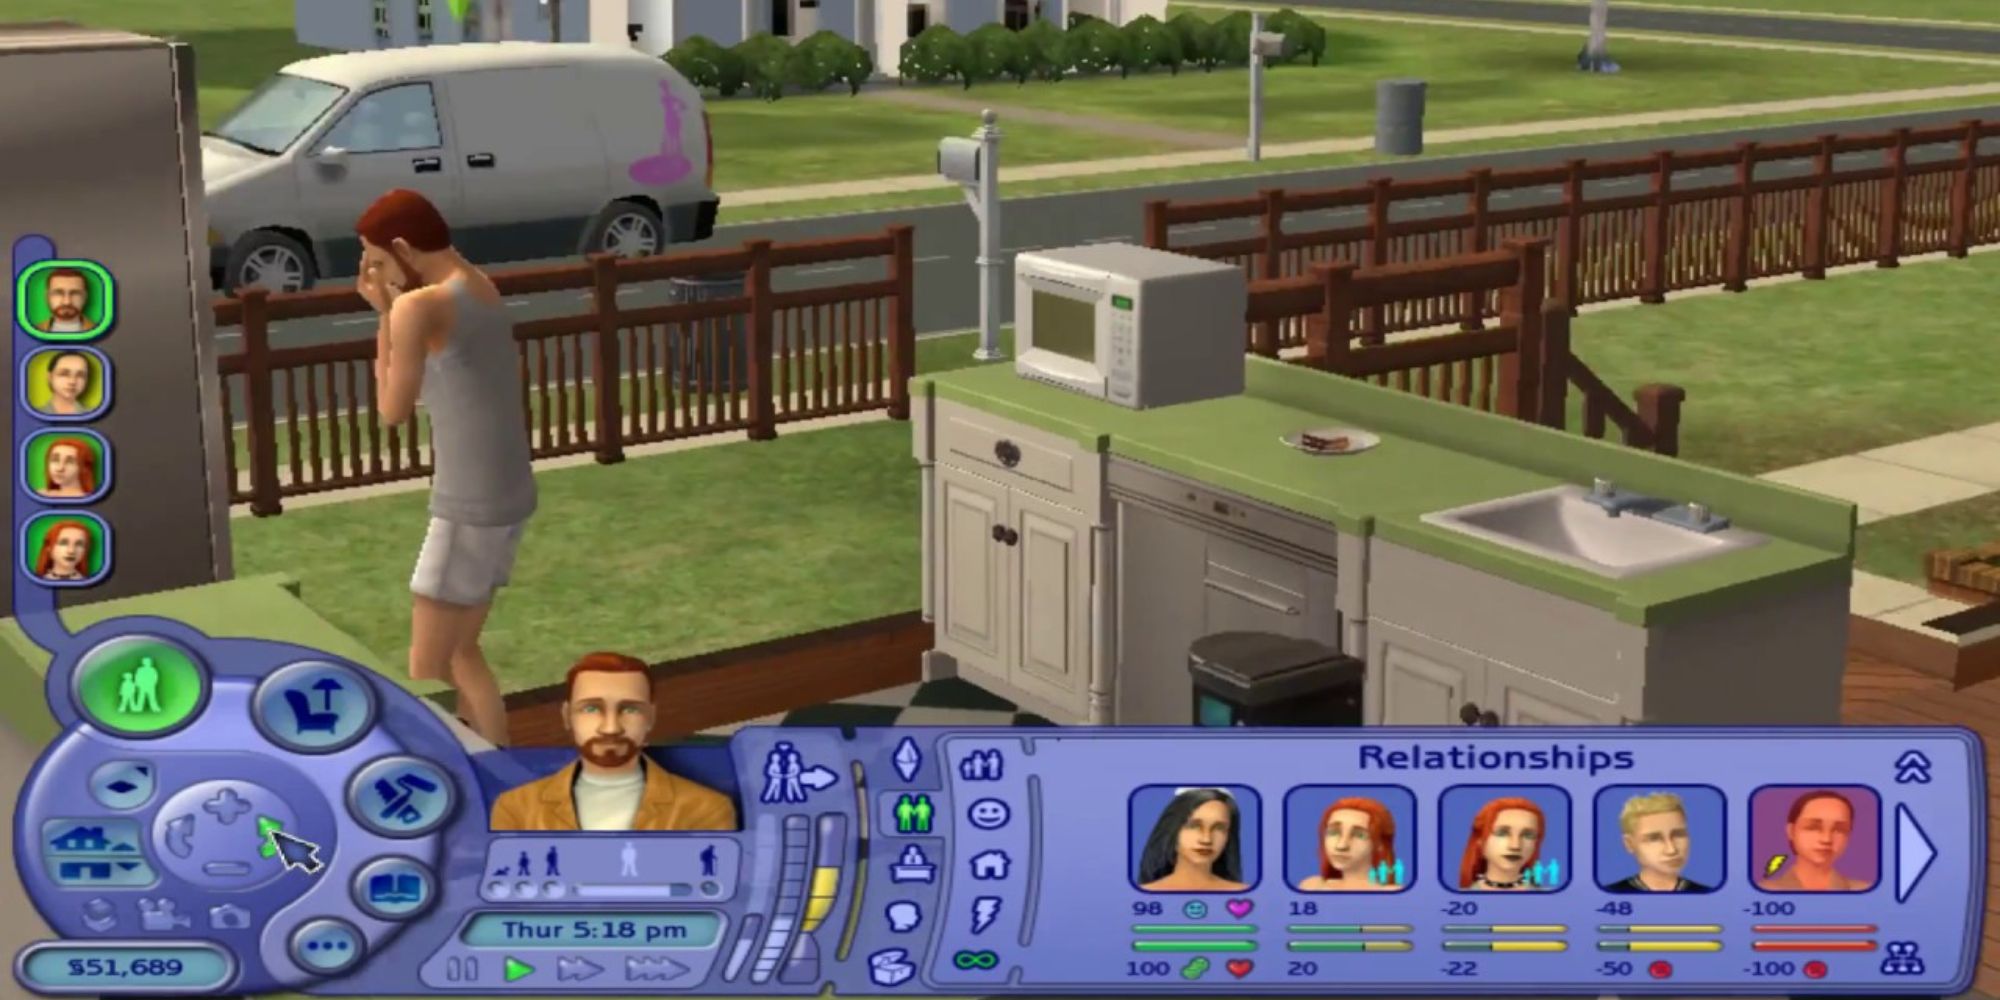 sims 2 sim in kitchen with the front yard and neighboring homes visible, along with in-game UI.